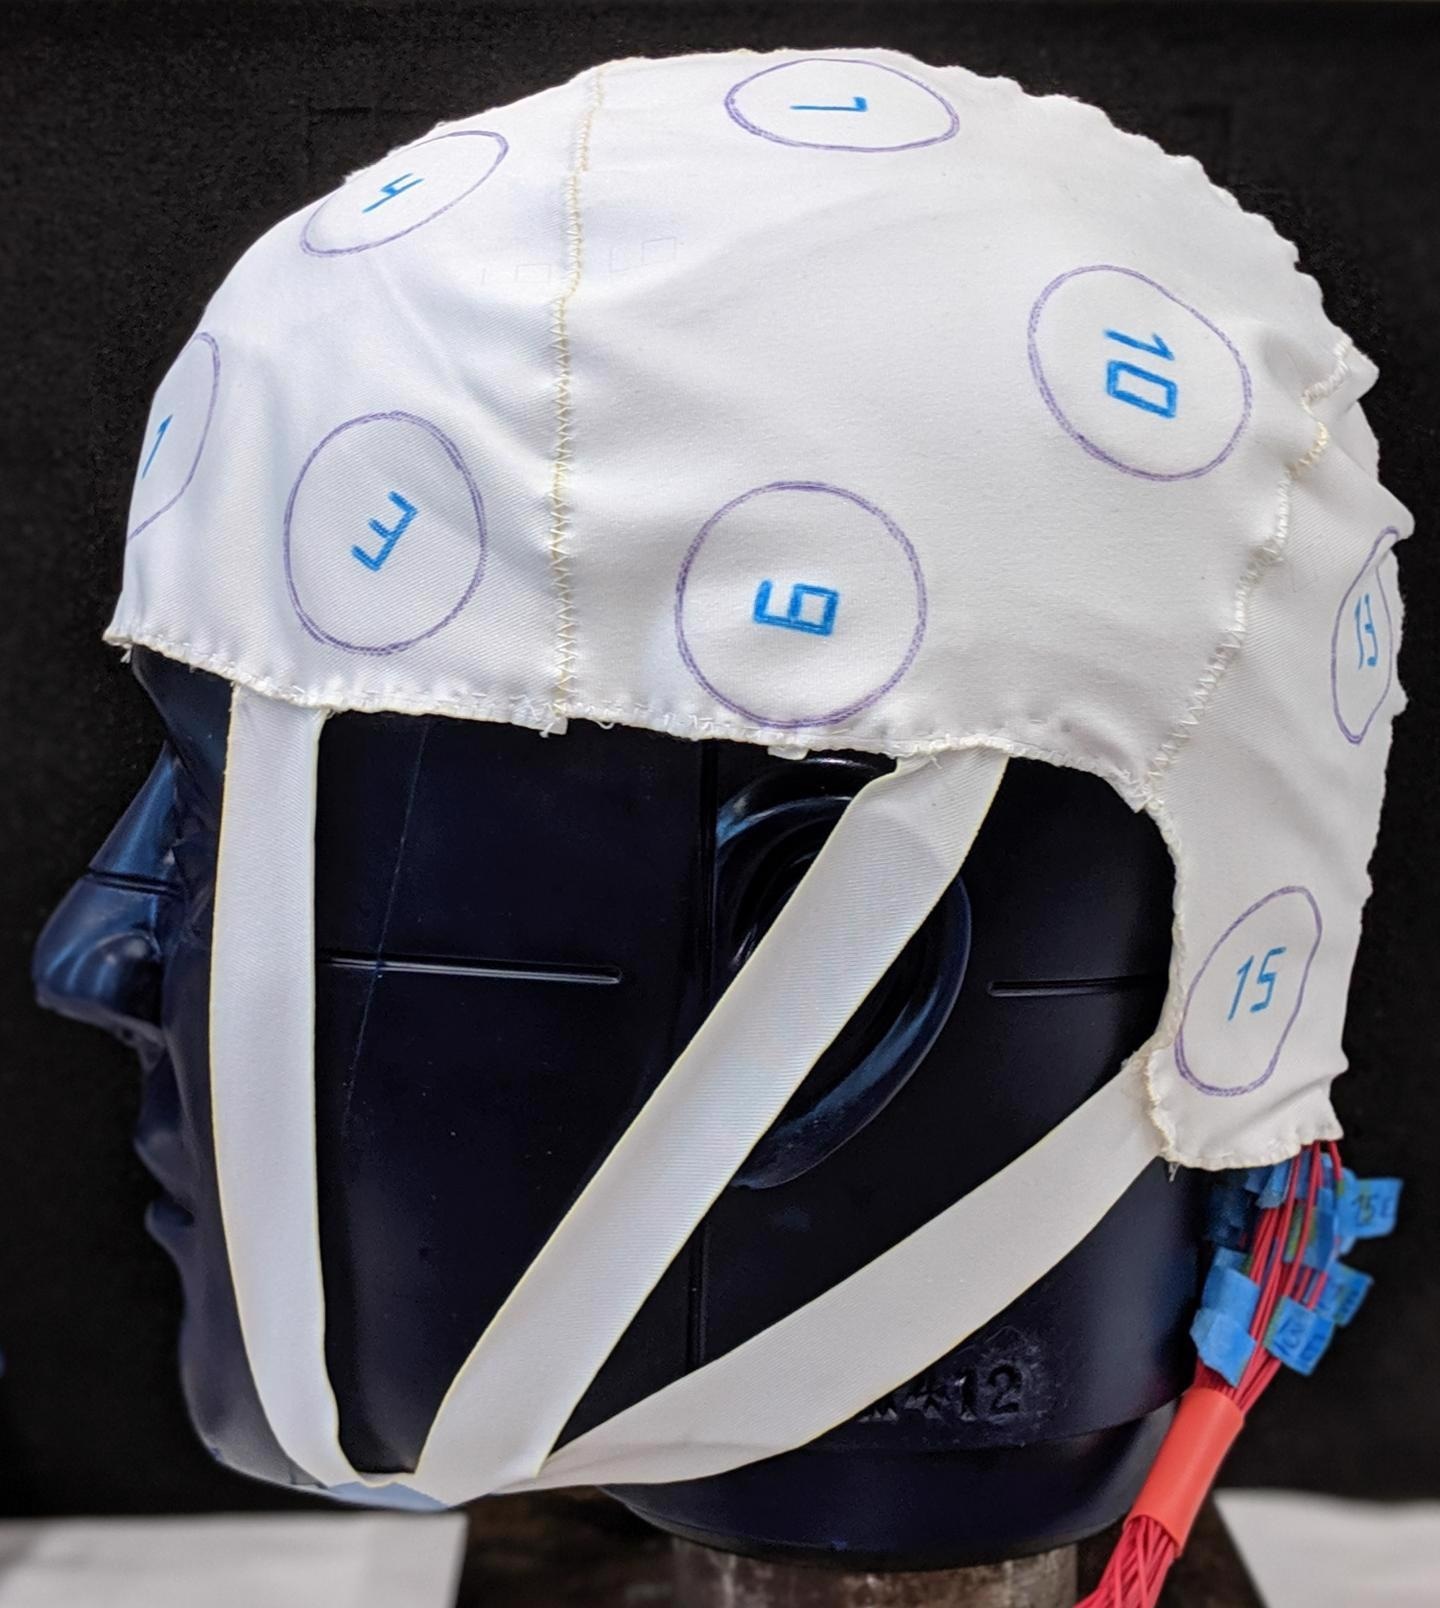 How a Pressure Sensitive Cap Can Protect Against Serious Head Injuries